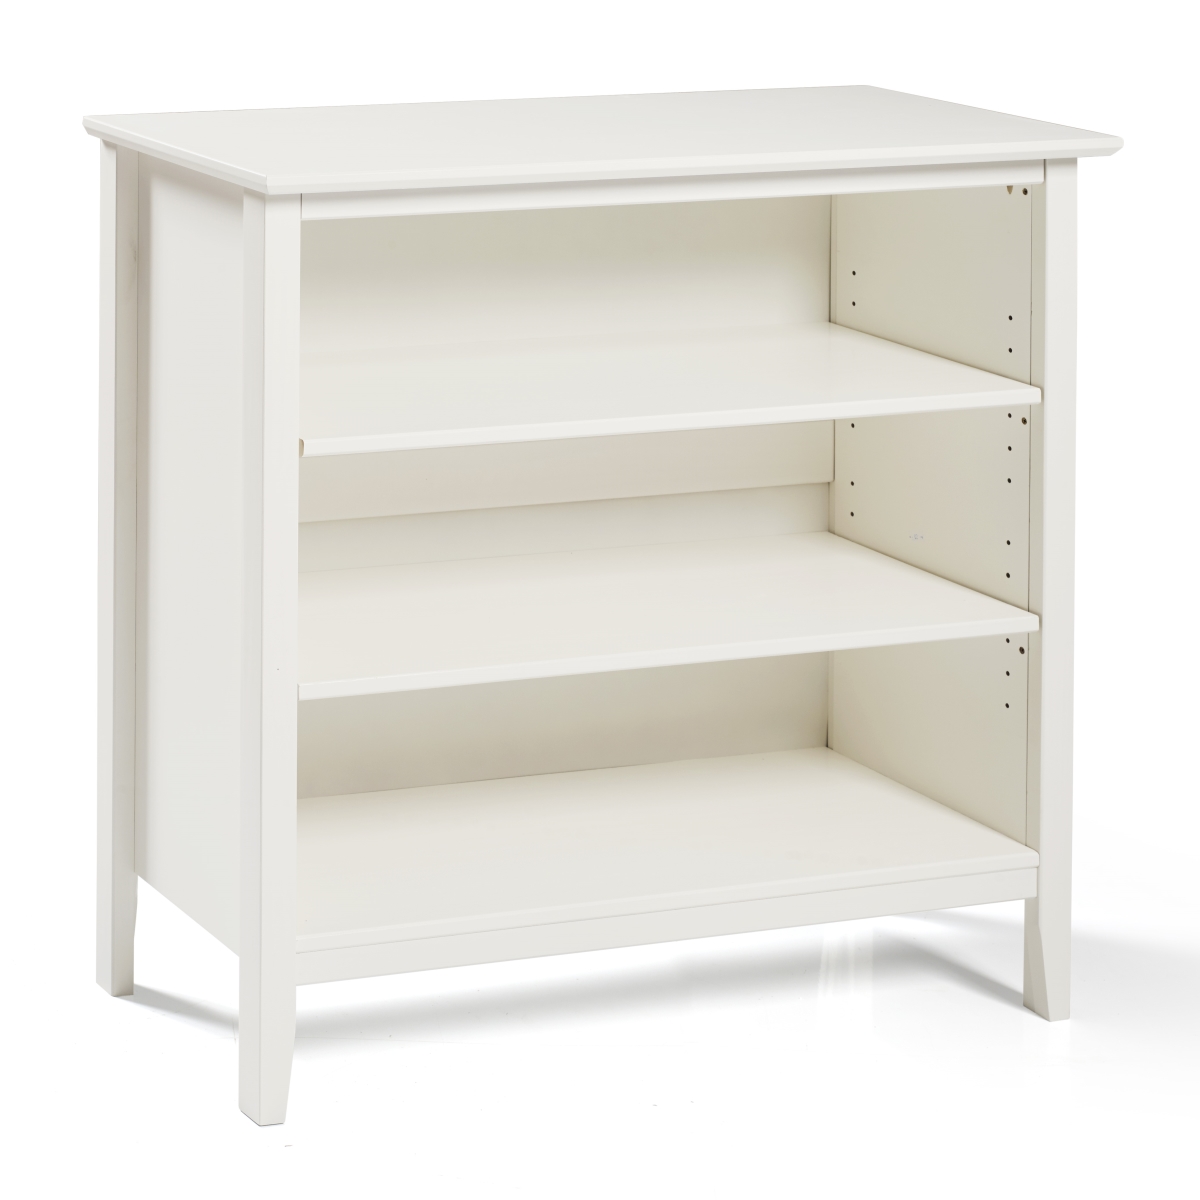 Picture of Alaterre AJSP04WH 34 in. Simplicity Wood Under-Window 3-Shelf Bookcase, White